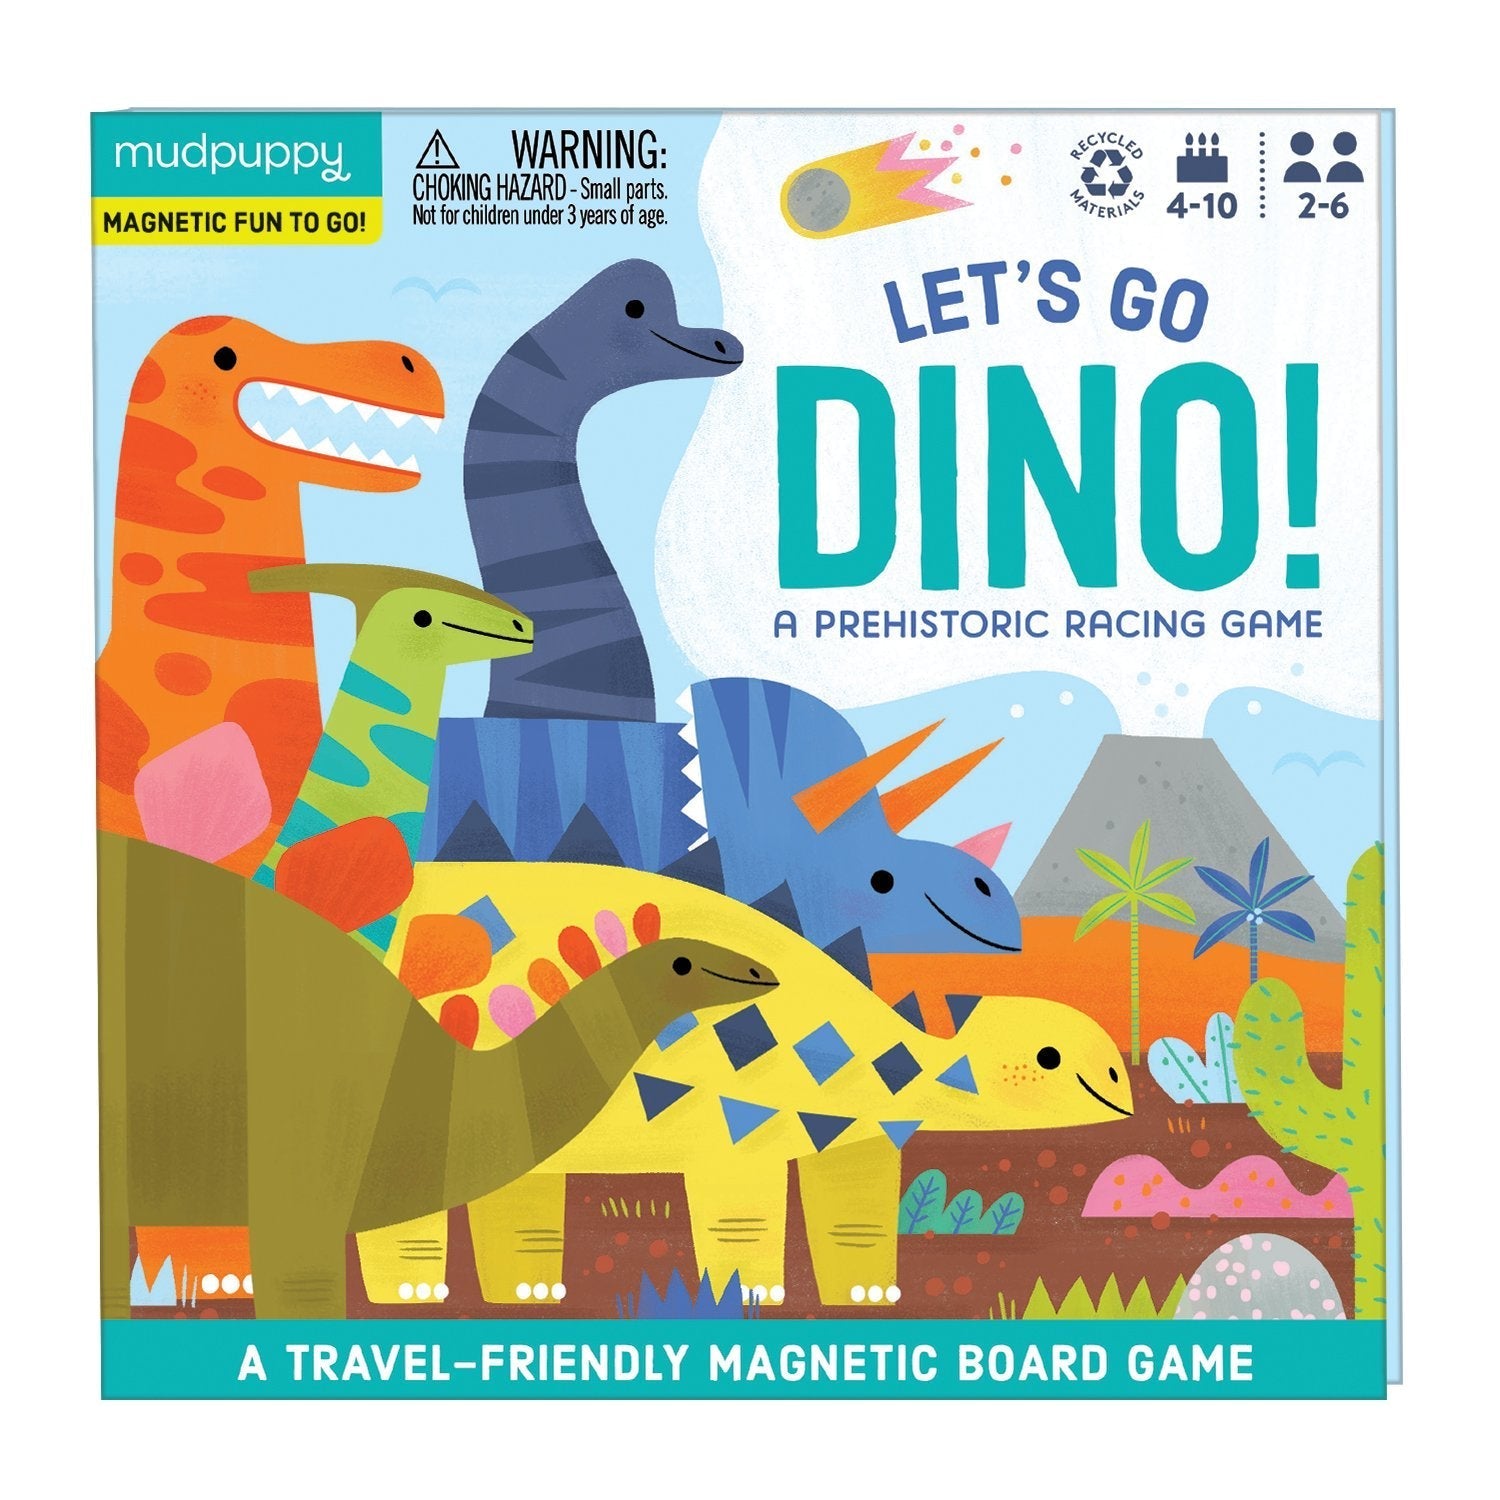 Let's Go Dino! A Prehistoric Racing Game